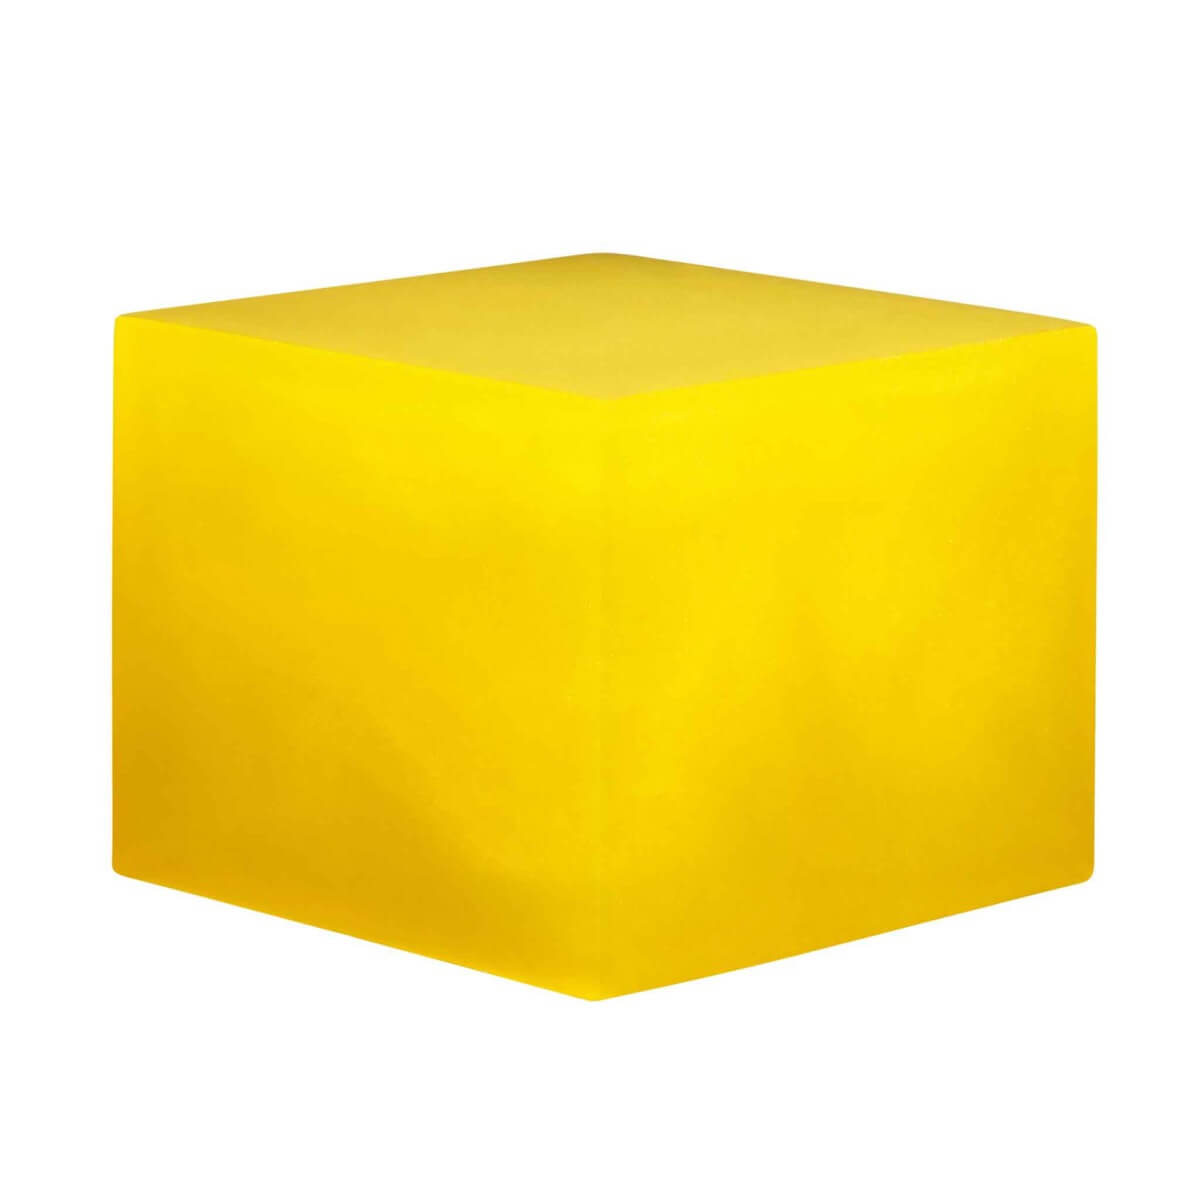 A resin cube made with the Lemon Yellow Mica Powder Pigment by Pigmently.